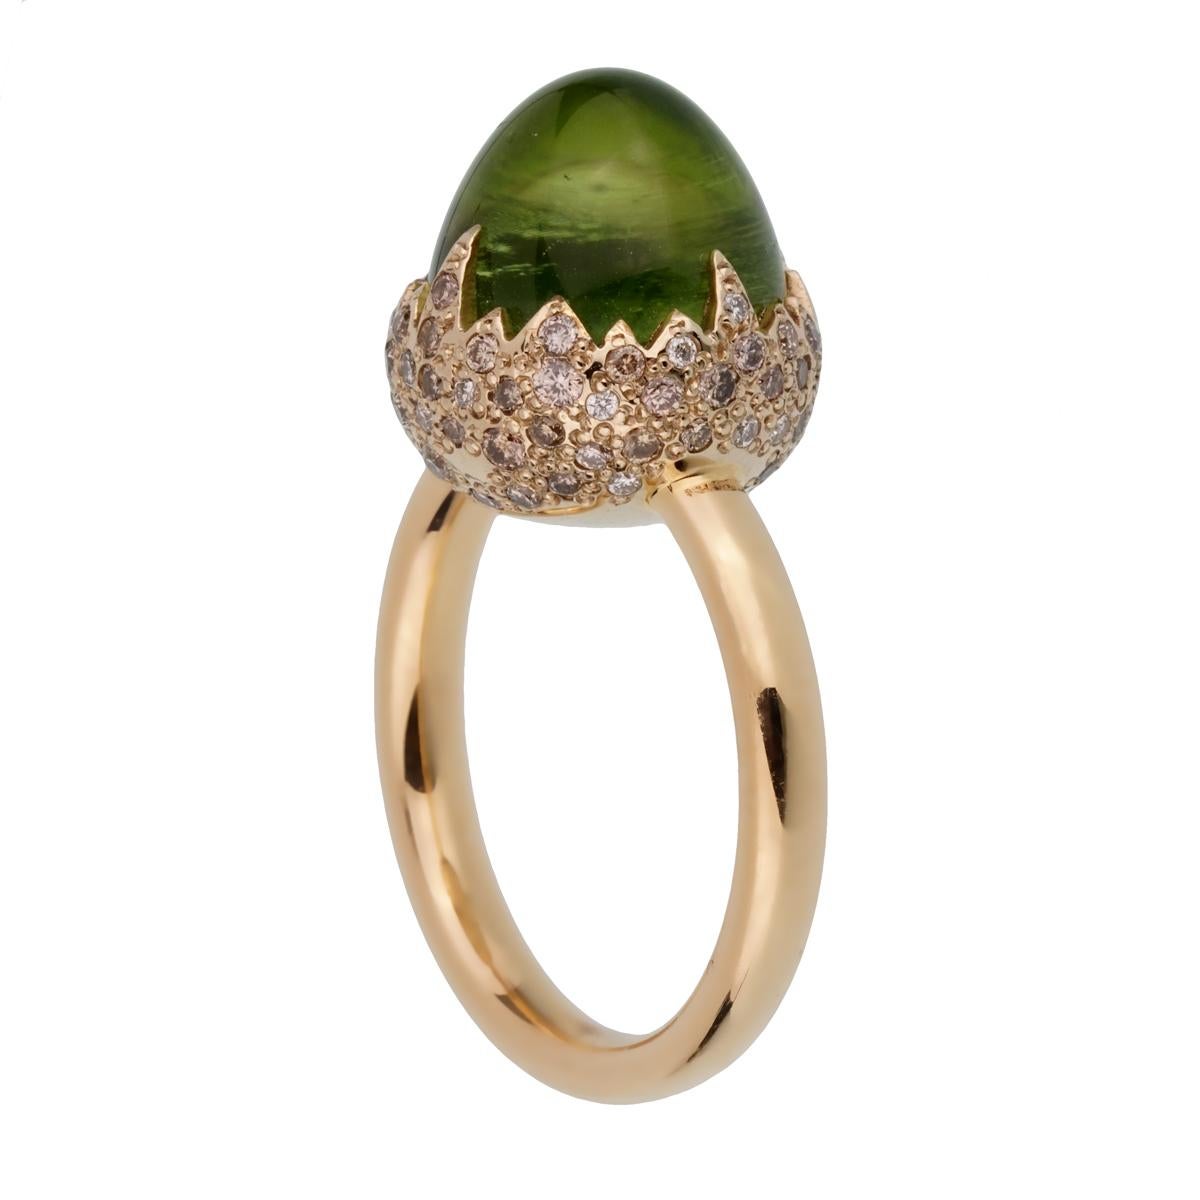 An iconic brand new Pomellato diamond cocktail ring showcasing a 8.30ct total weight Peridot encased with .25ct of round brilliant cut diamonds in shimmering 18k rose gold. The ring measures a size 6 1/2 and can be resized

Pomellato Retail Price: